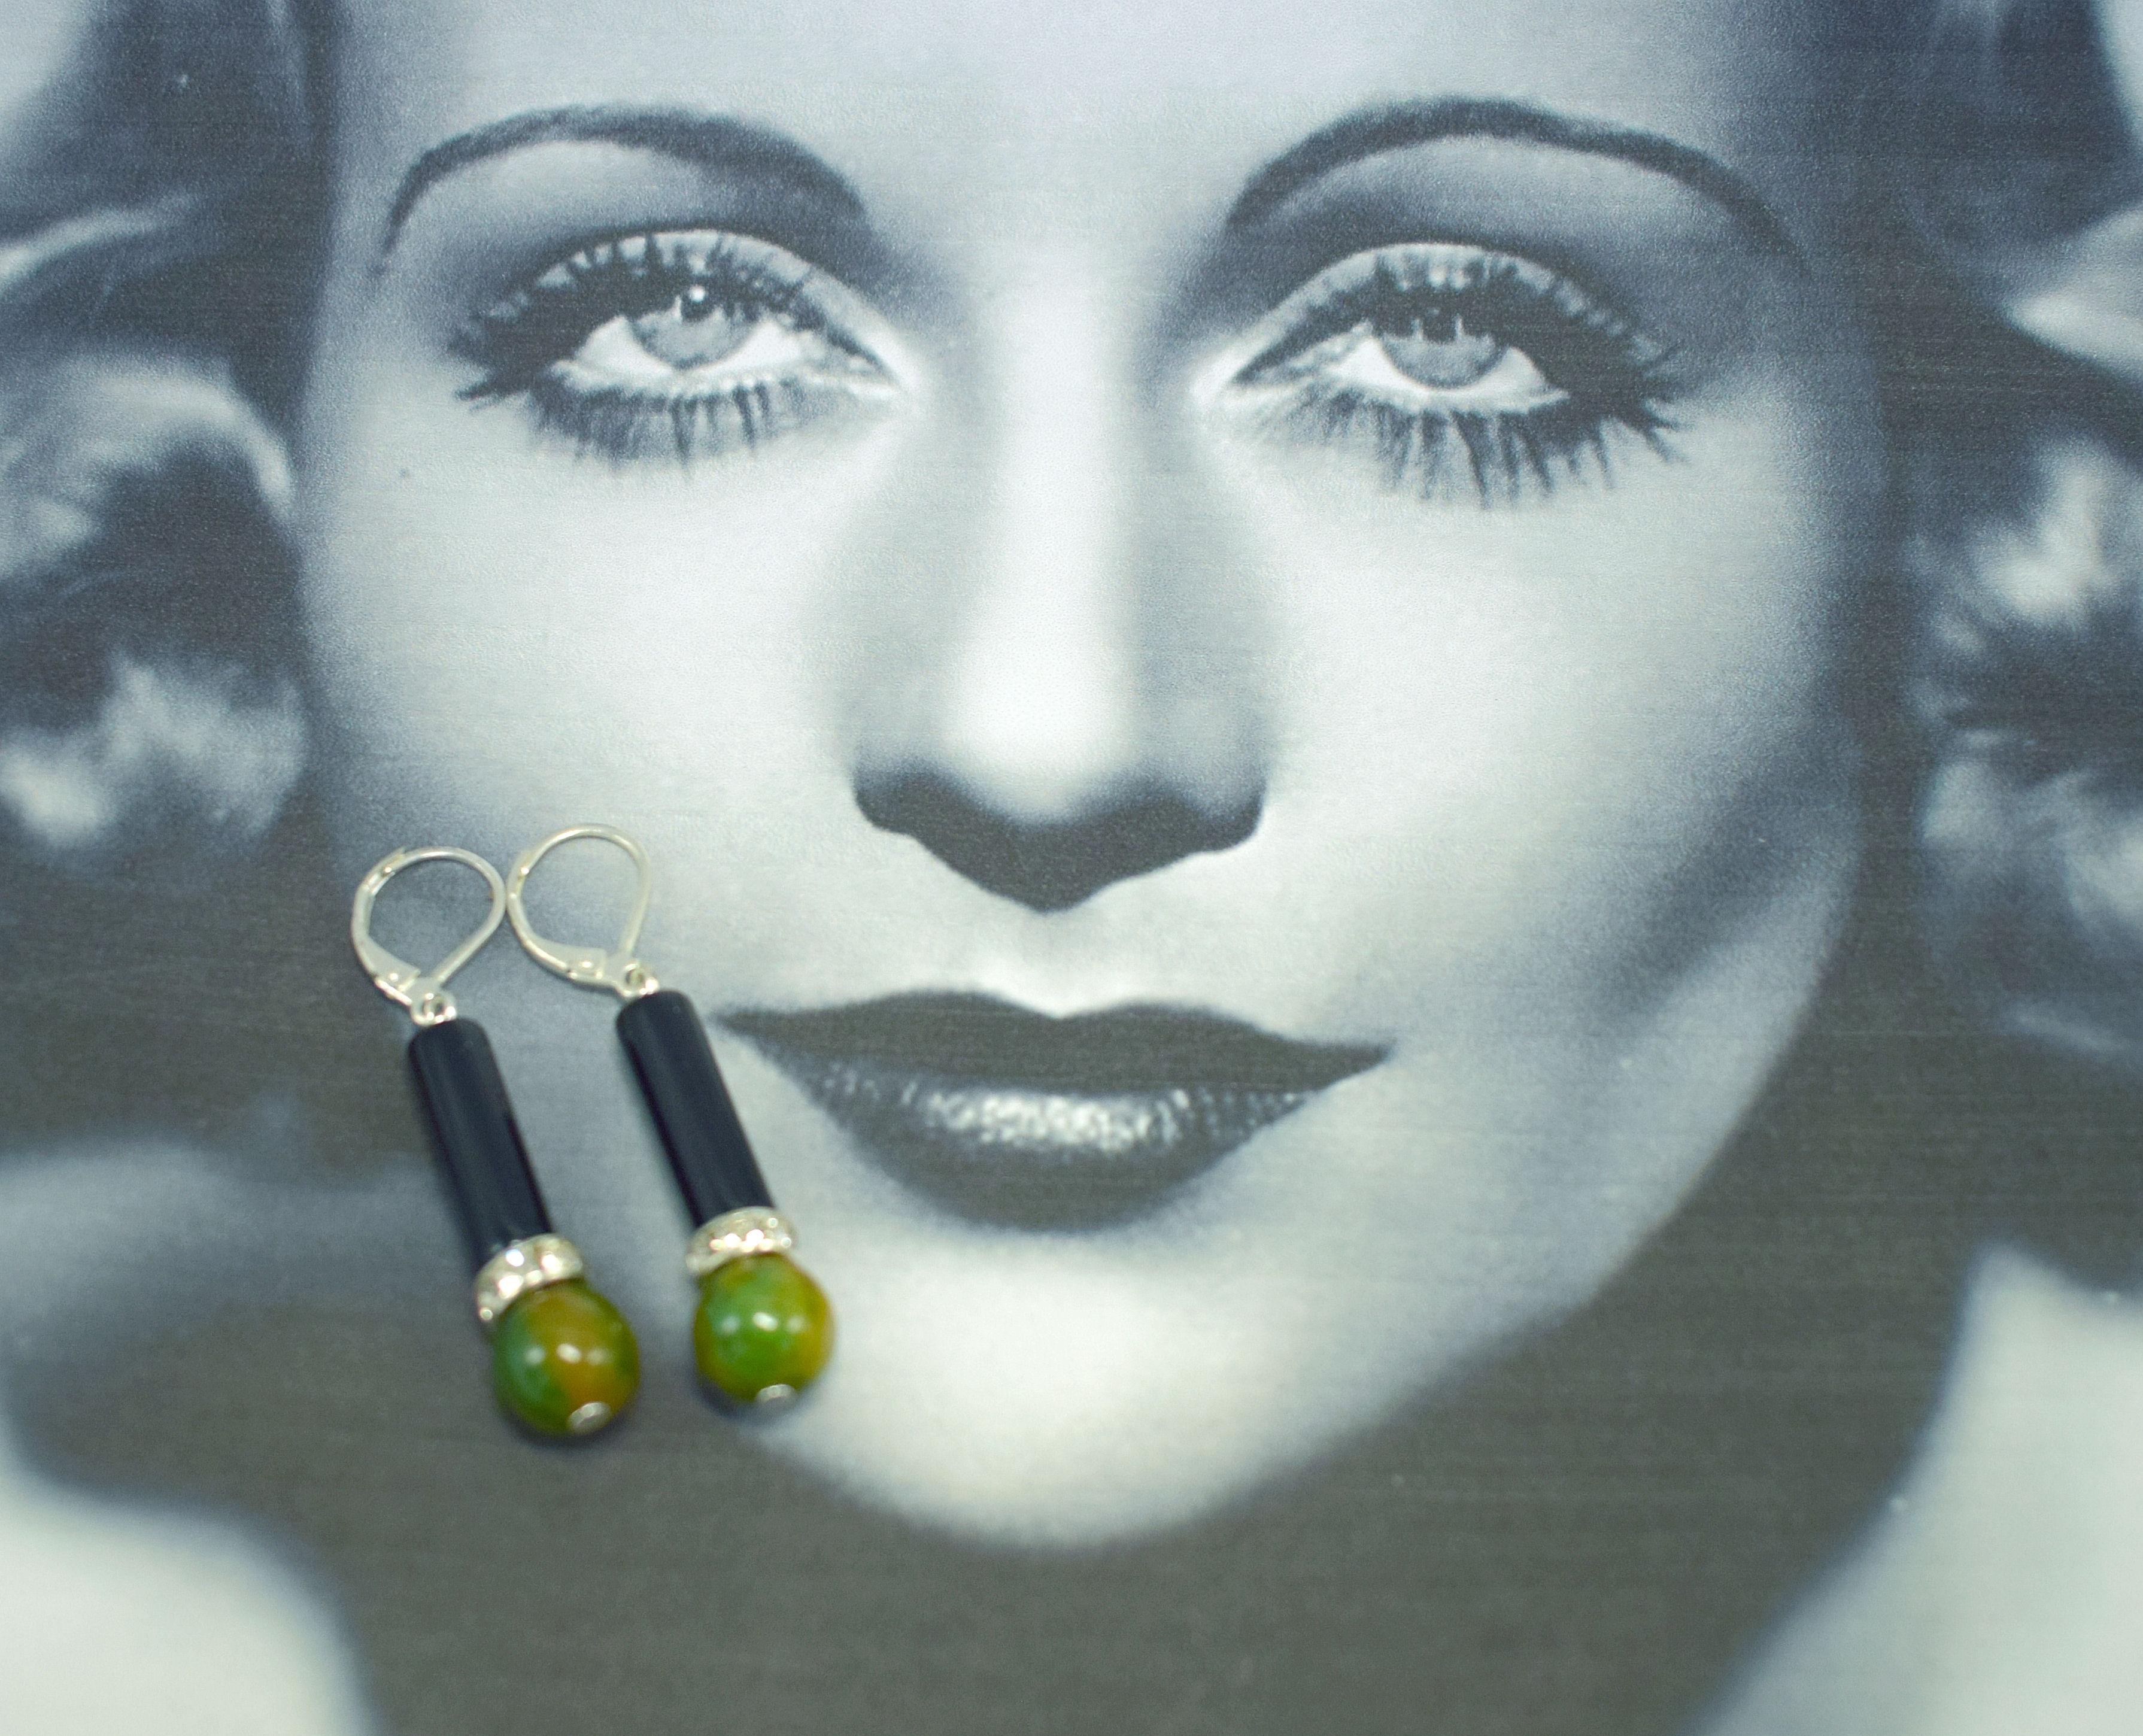 Stylish 1930's Art Deco bakelite pair of  earrings in a lovely marbled green & yellow ‘end of day’ phenolic bakelite with black Lucite and circle of diamante stones. Silver plated lever back for pierced ears which are replacements to the originals